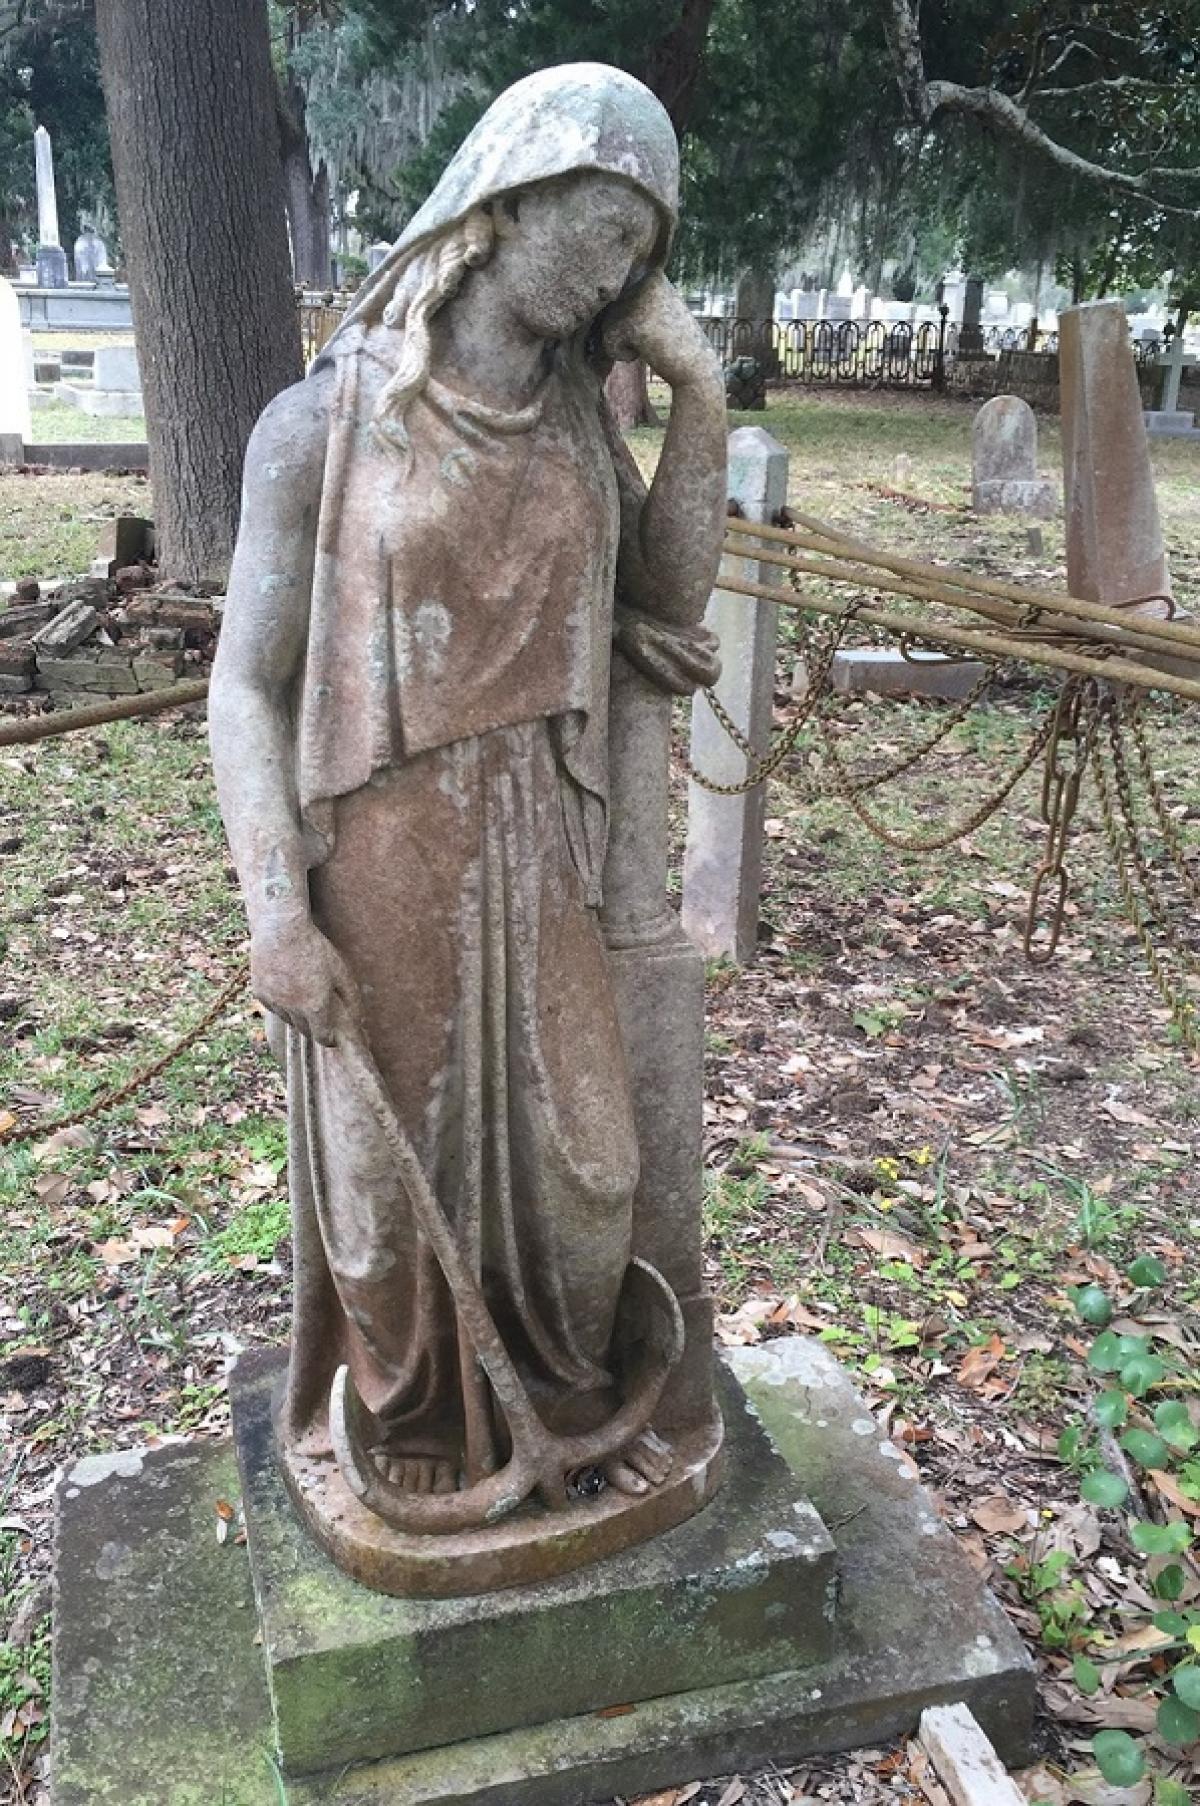 OK, Grove, Headstone Symbols and Meanings, Woman, Holding Anchor